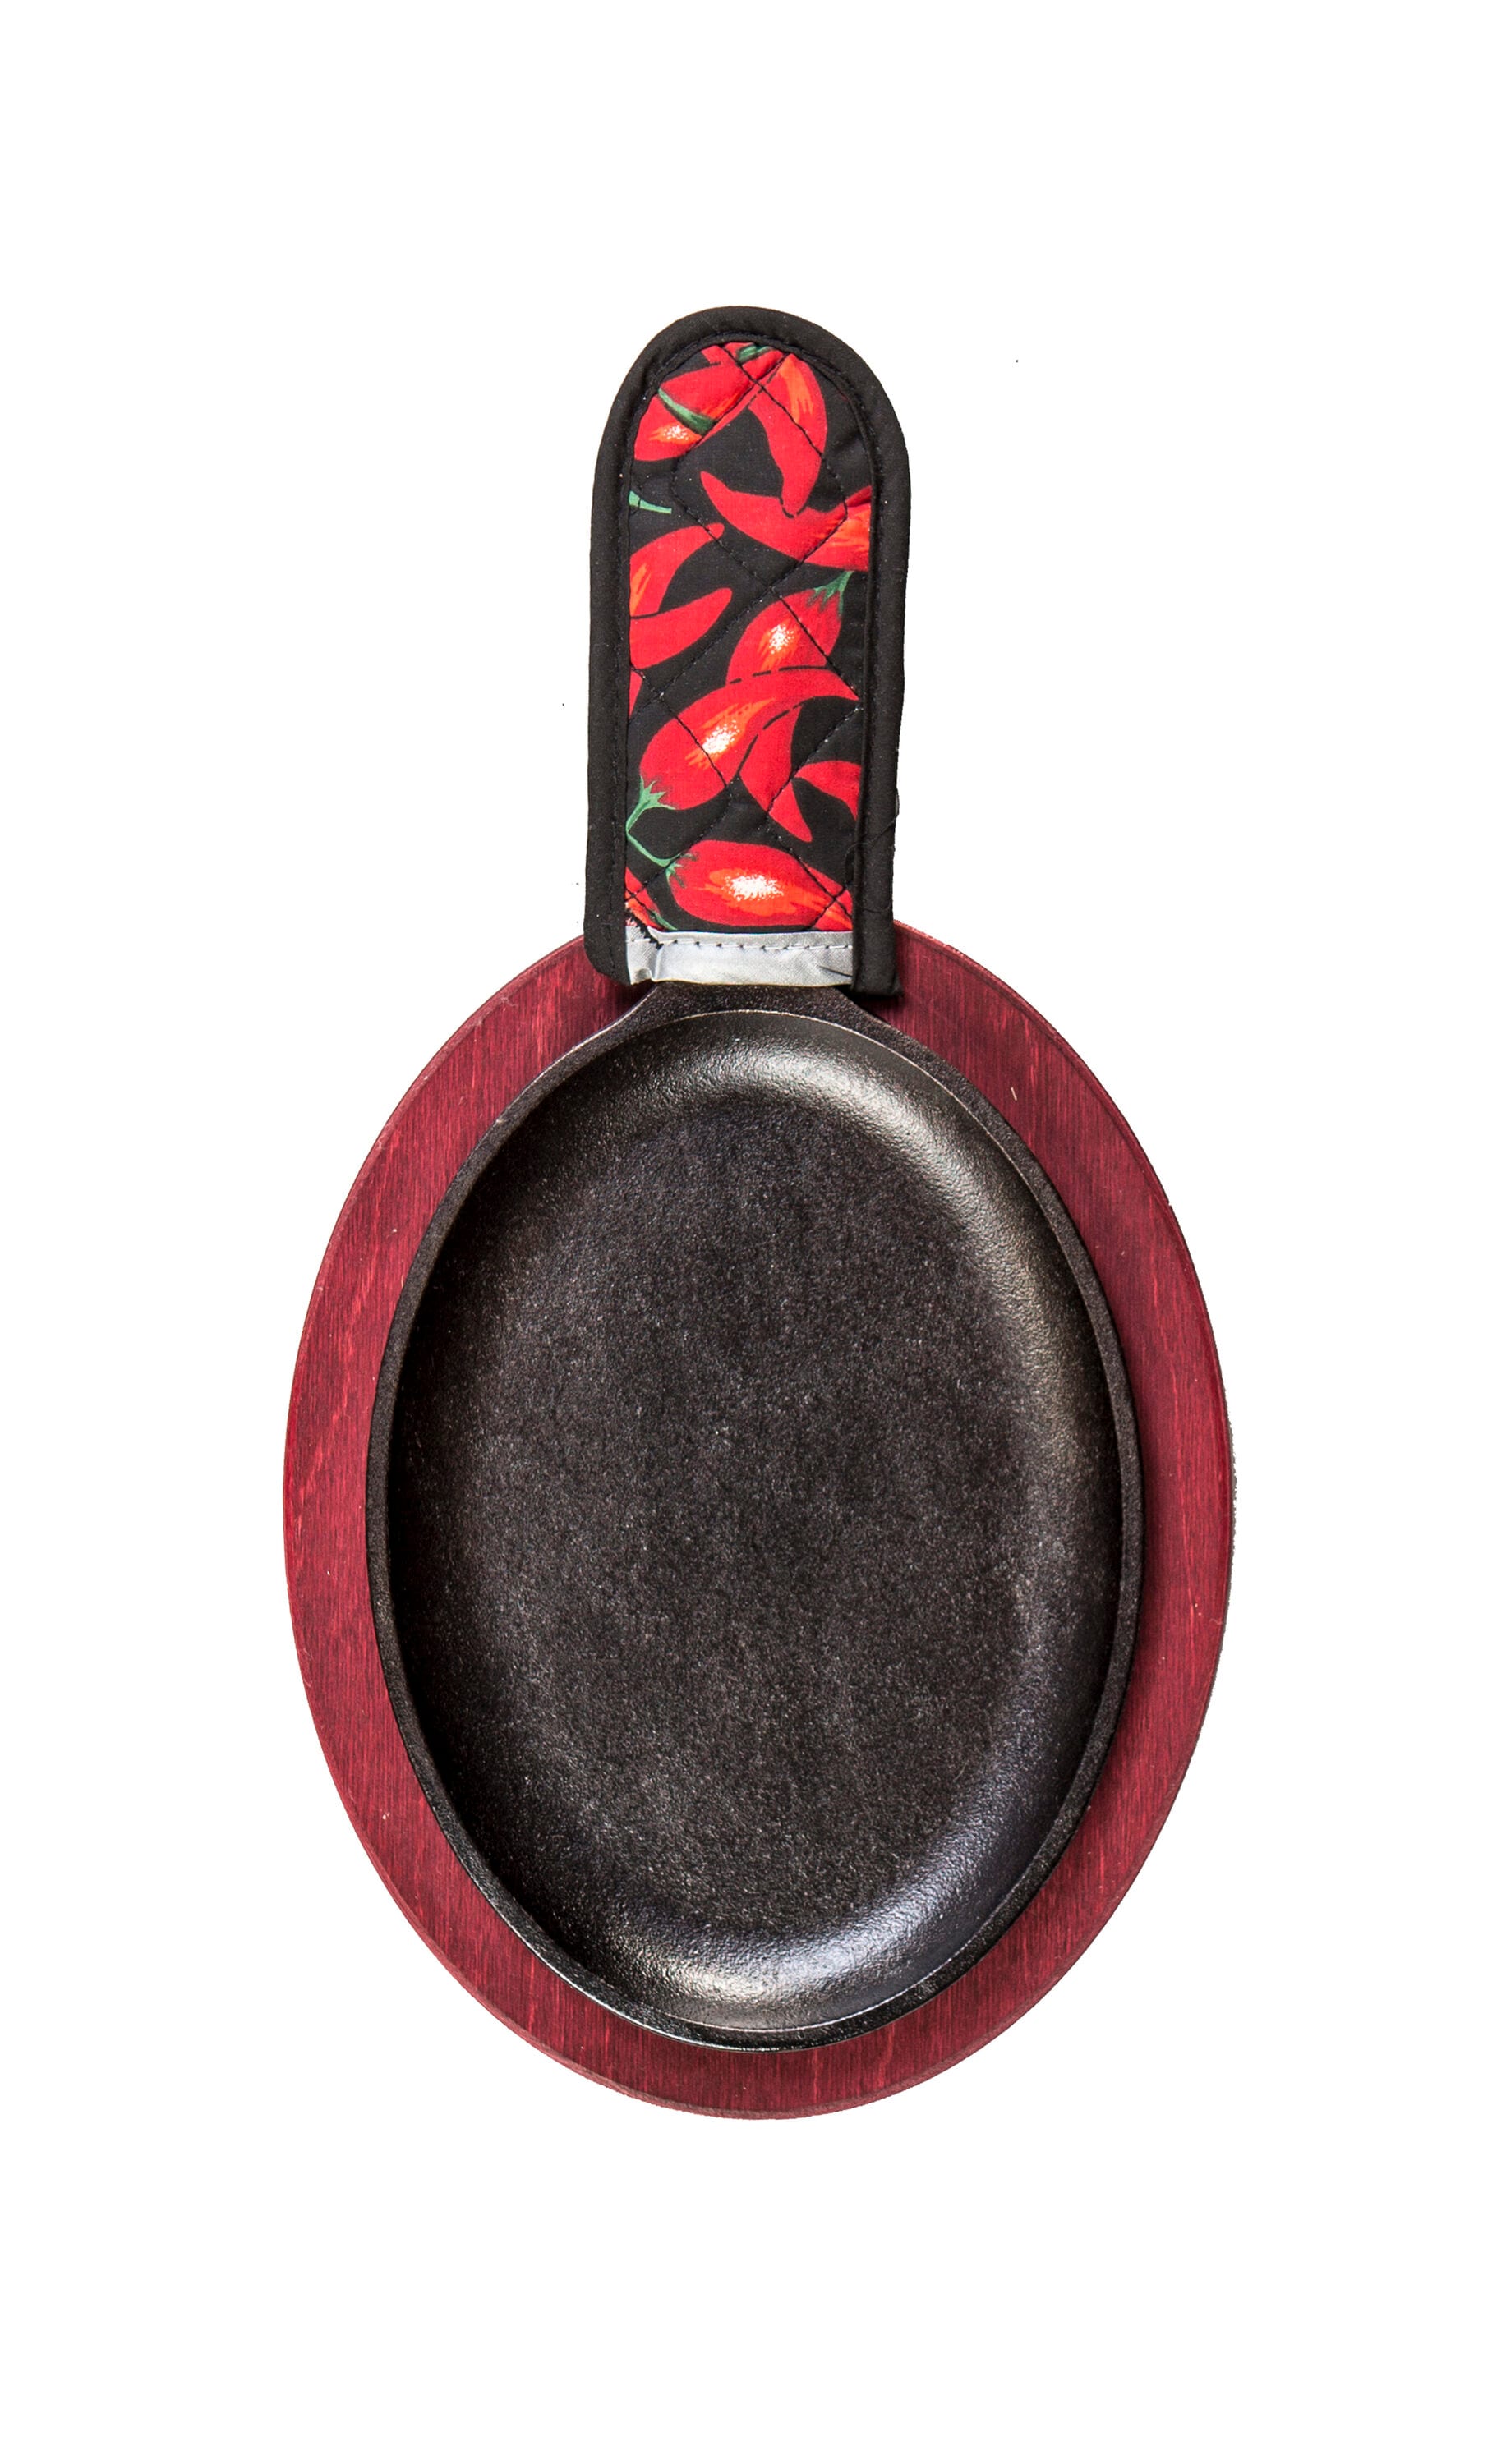 Lodge LFSR3 10 x 7 1/2 Oval Pre-Seasoned Cast Iron Fajita Skillet with  Red Wood Underliner and Chili Pepper Handle Holder